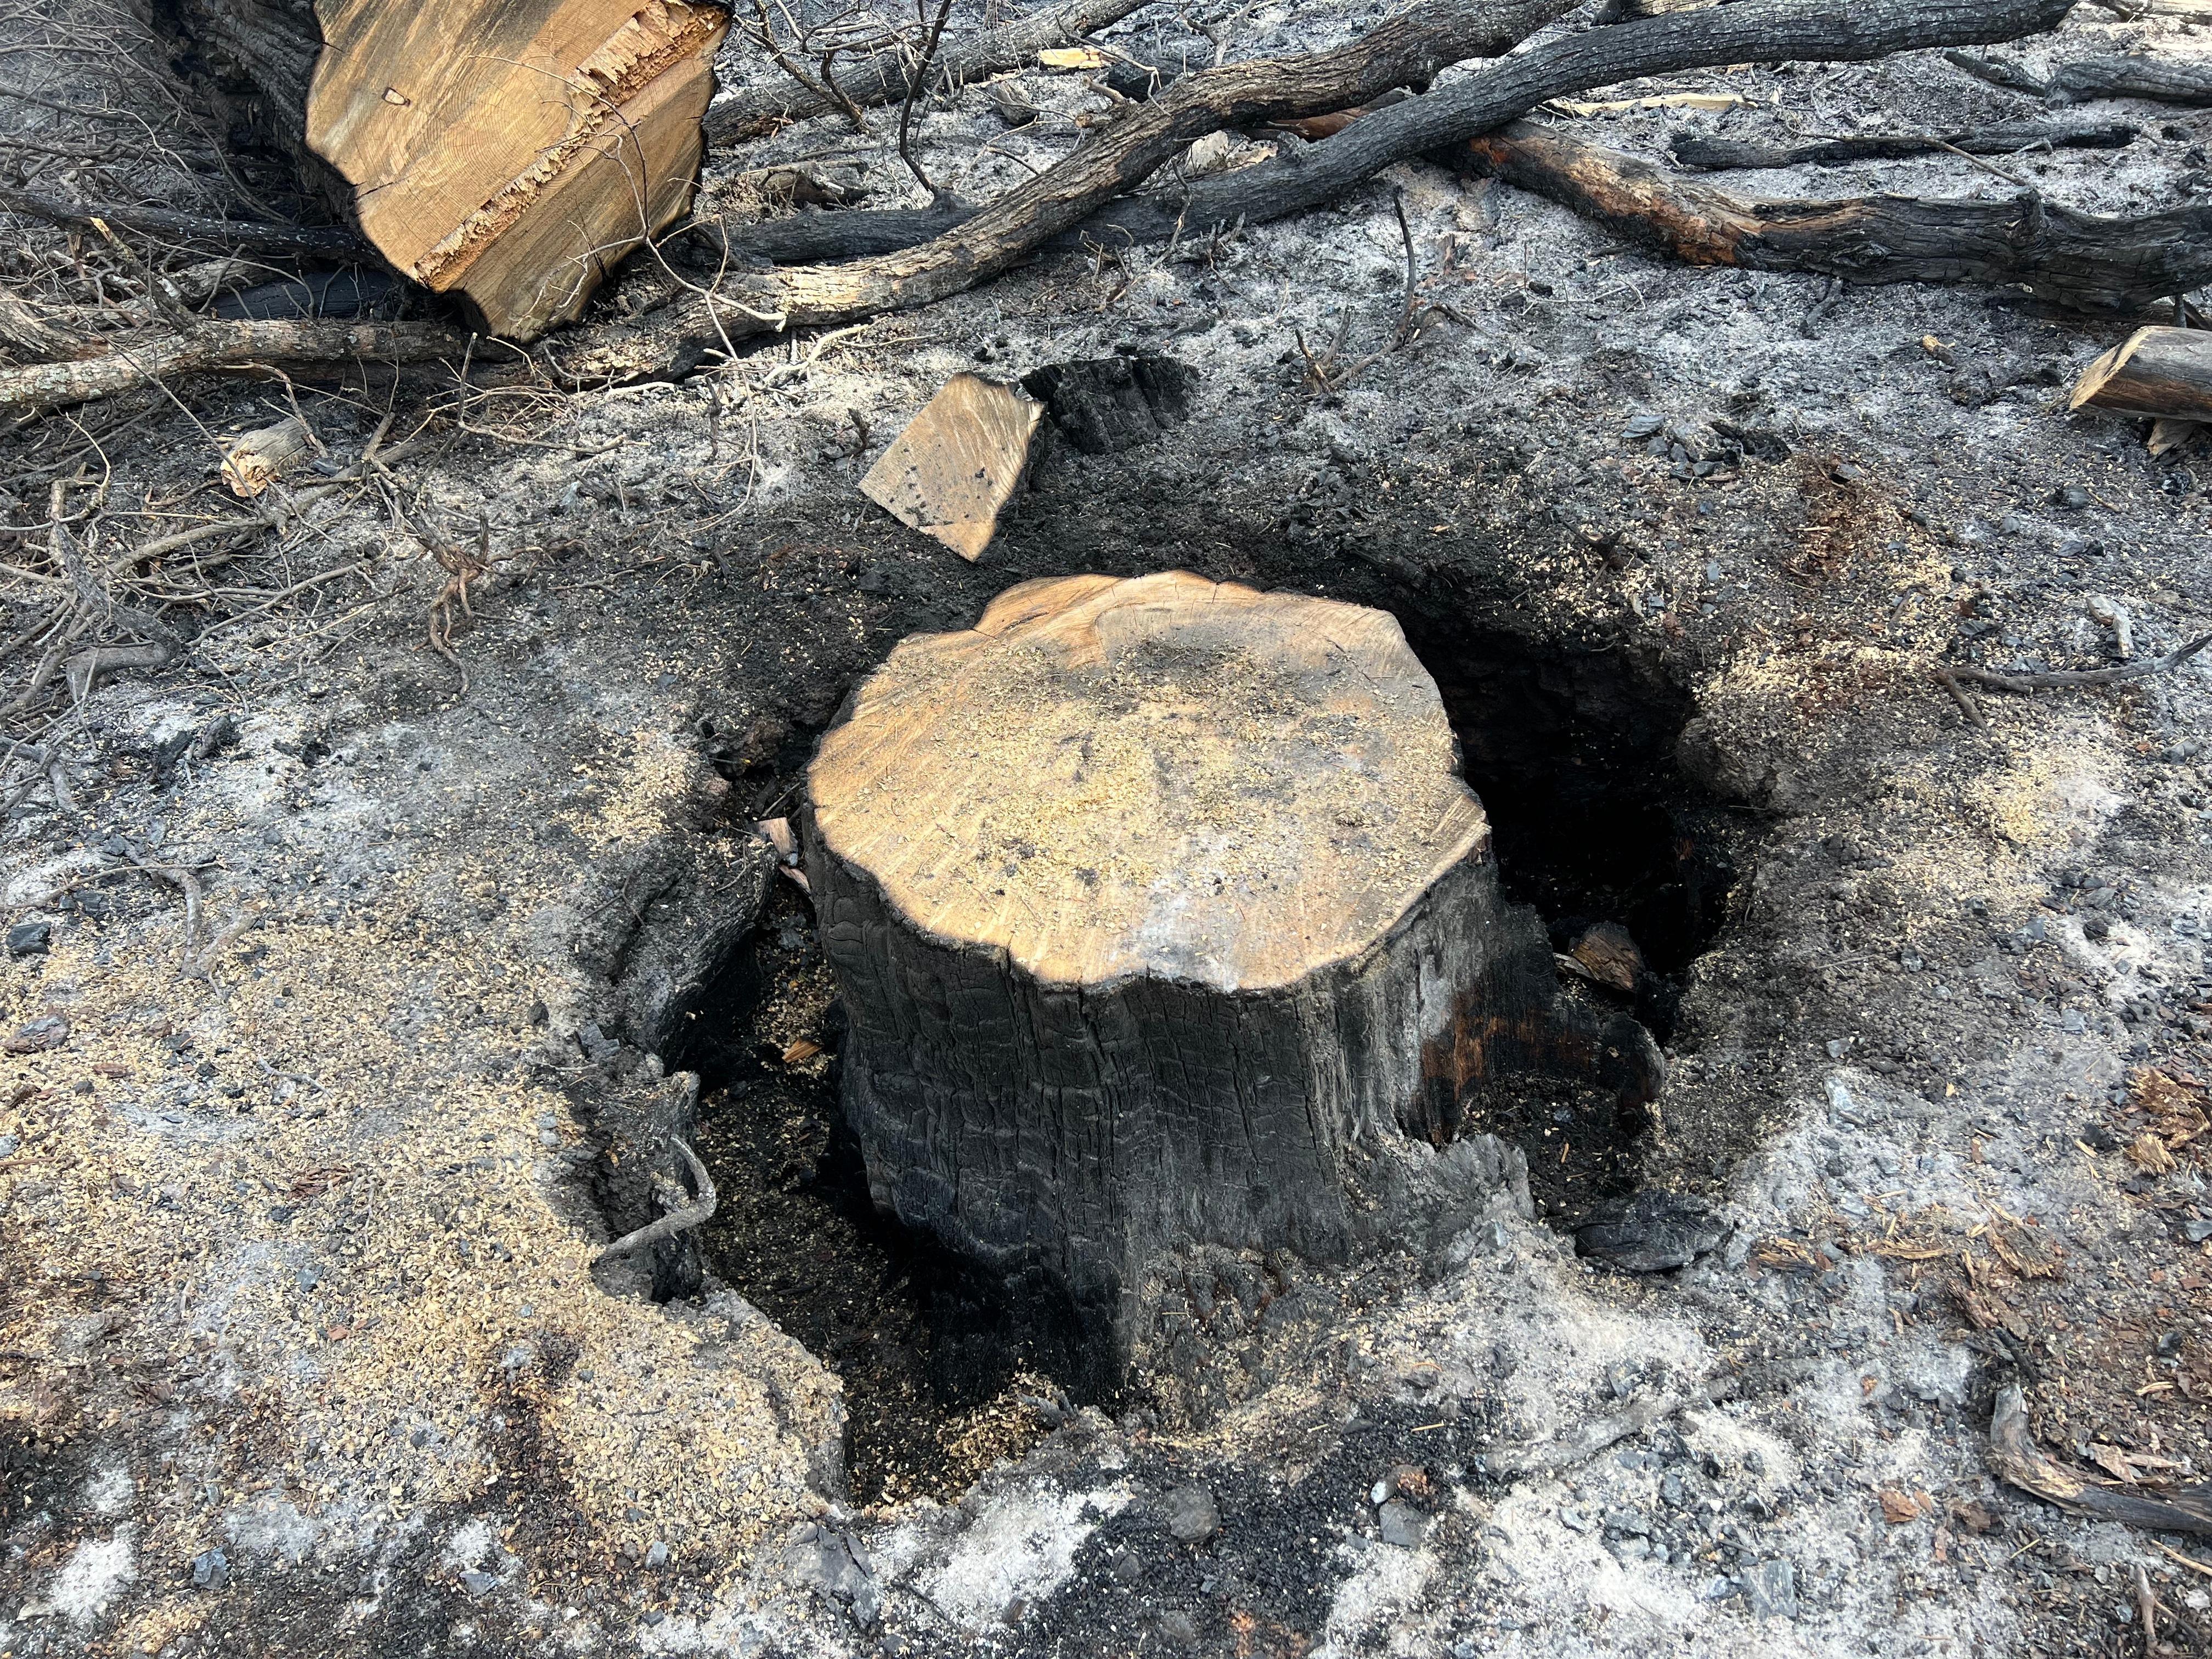 The stump of a burned tree that has been cut down is shown.